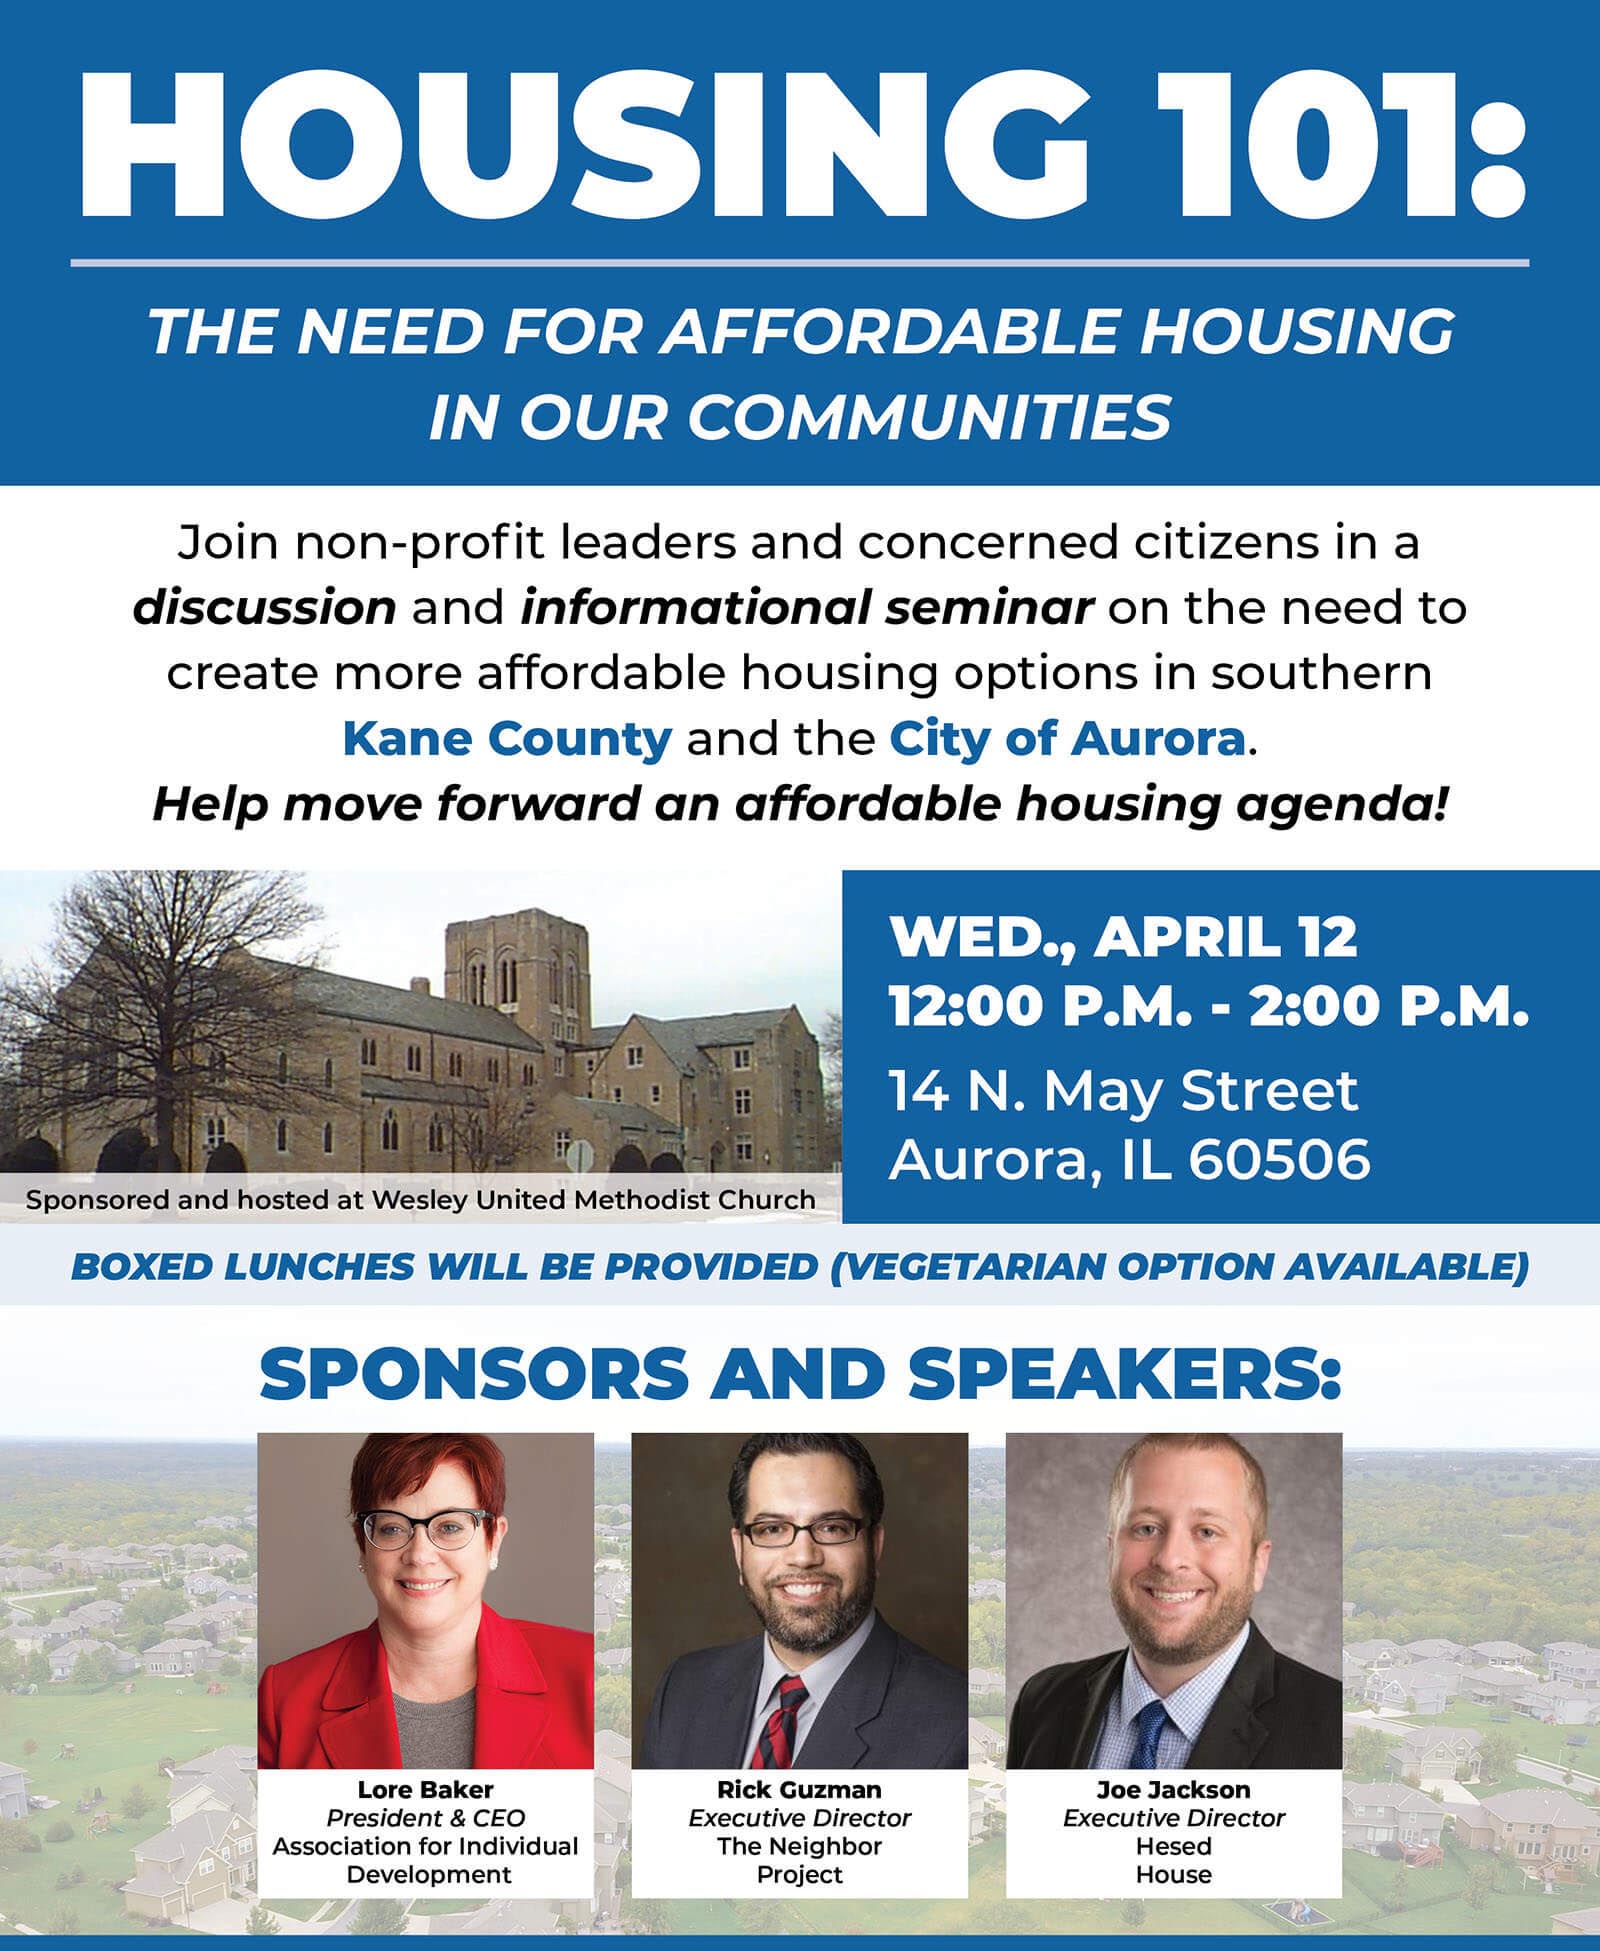 HOUSING 101: THE NEED FOR AFFORDABLE HOUSING IN OUR COMMUNITIES Join non-profit leaders and concerned citizens in a discussion and informational seminar on the need to create more affordable housing options in southern Kane County and the City of Aurora. Help move forward an affordable housing agenda! WED., APRIL 12 12:00 P.M. - 2:00 P.M. 14 N. May Street Aurora, IL 60506 SPONSORS AND SPEAKERS: Sponsored and hosted at Wesley United Methodist Church Lore Baker President & CEO Association for Individual Development Rick Guzman Executive Director The Neighbor Project Joe Jackson Executive Director Hesed House PLEASE REGISTER BY APRIL 5!